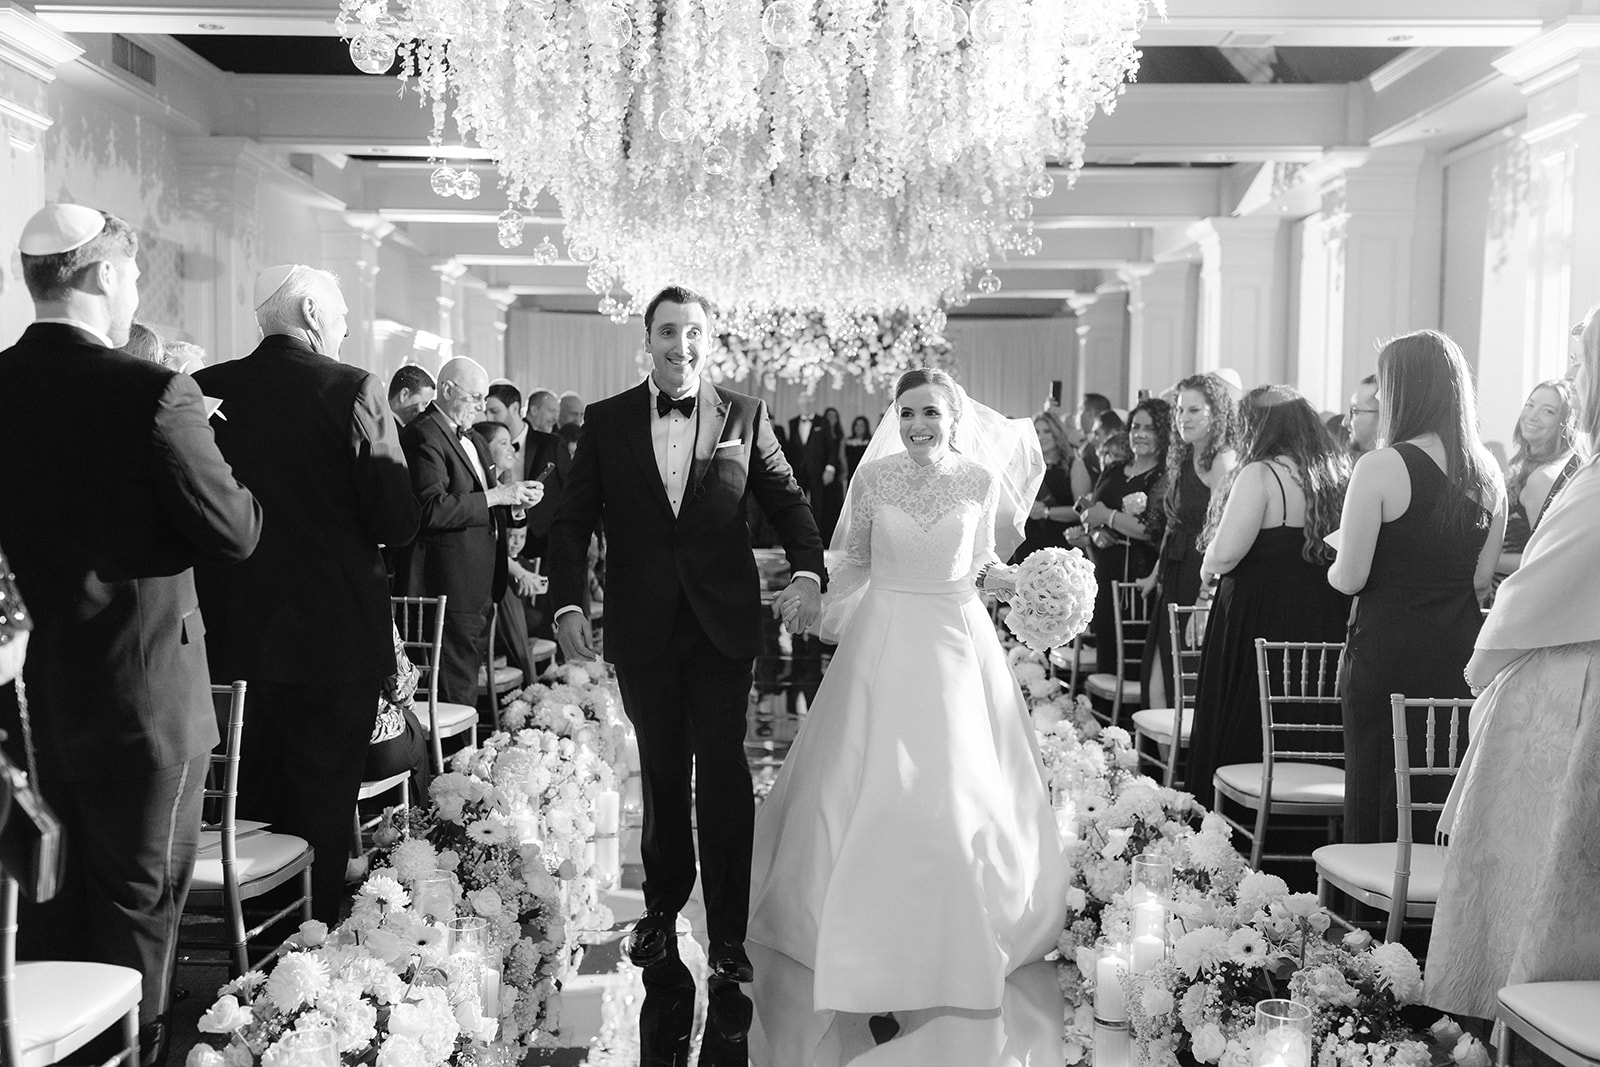 Bride and groom recessional with a reflective aisle and hanging florals. 